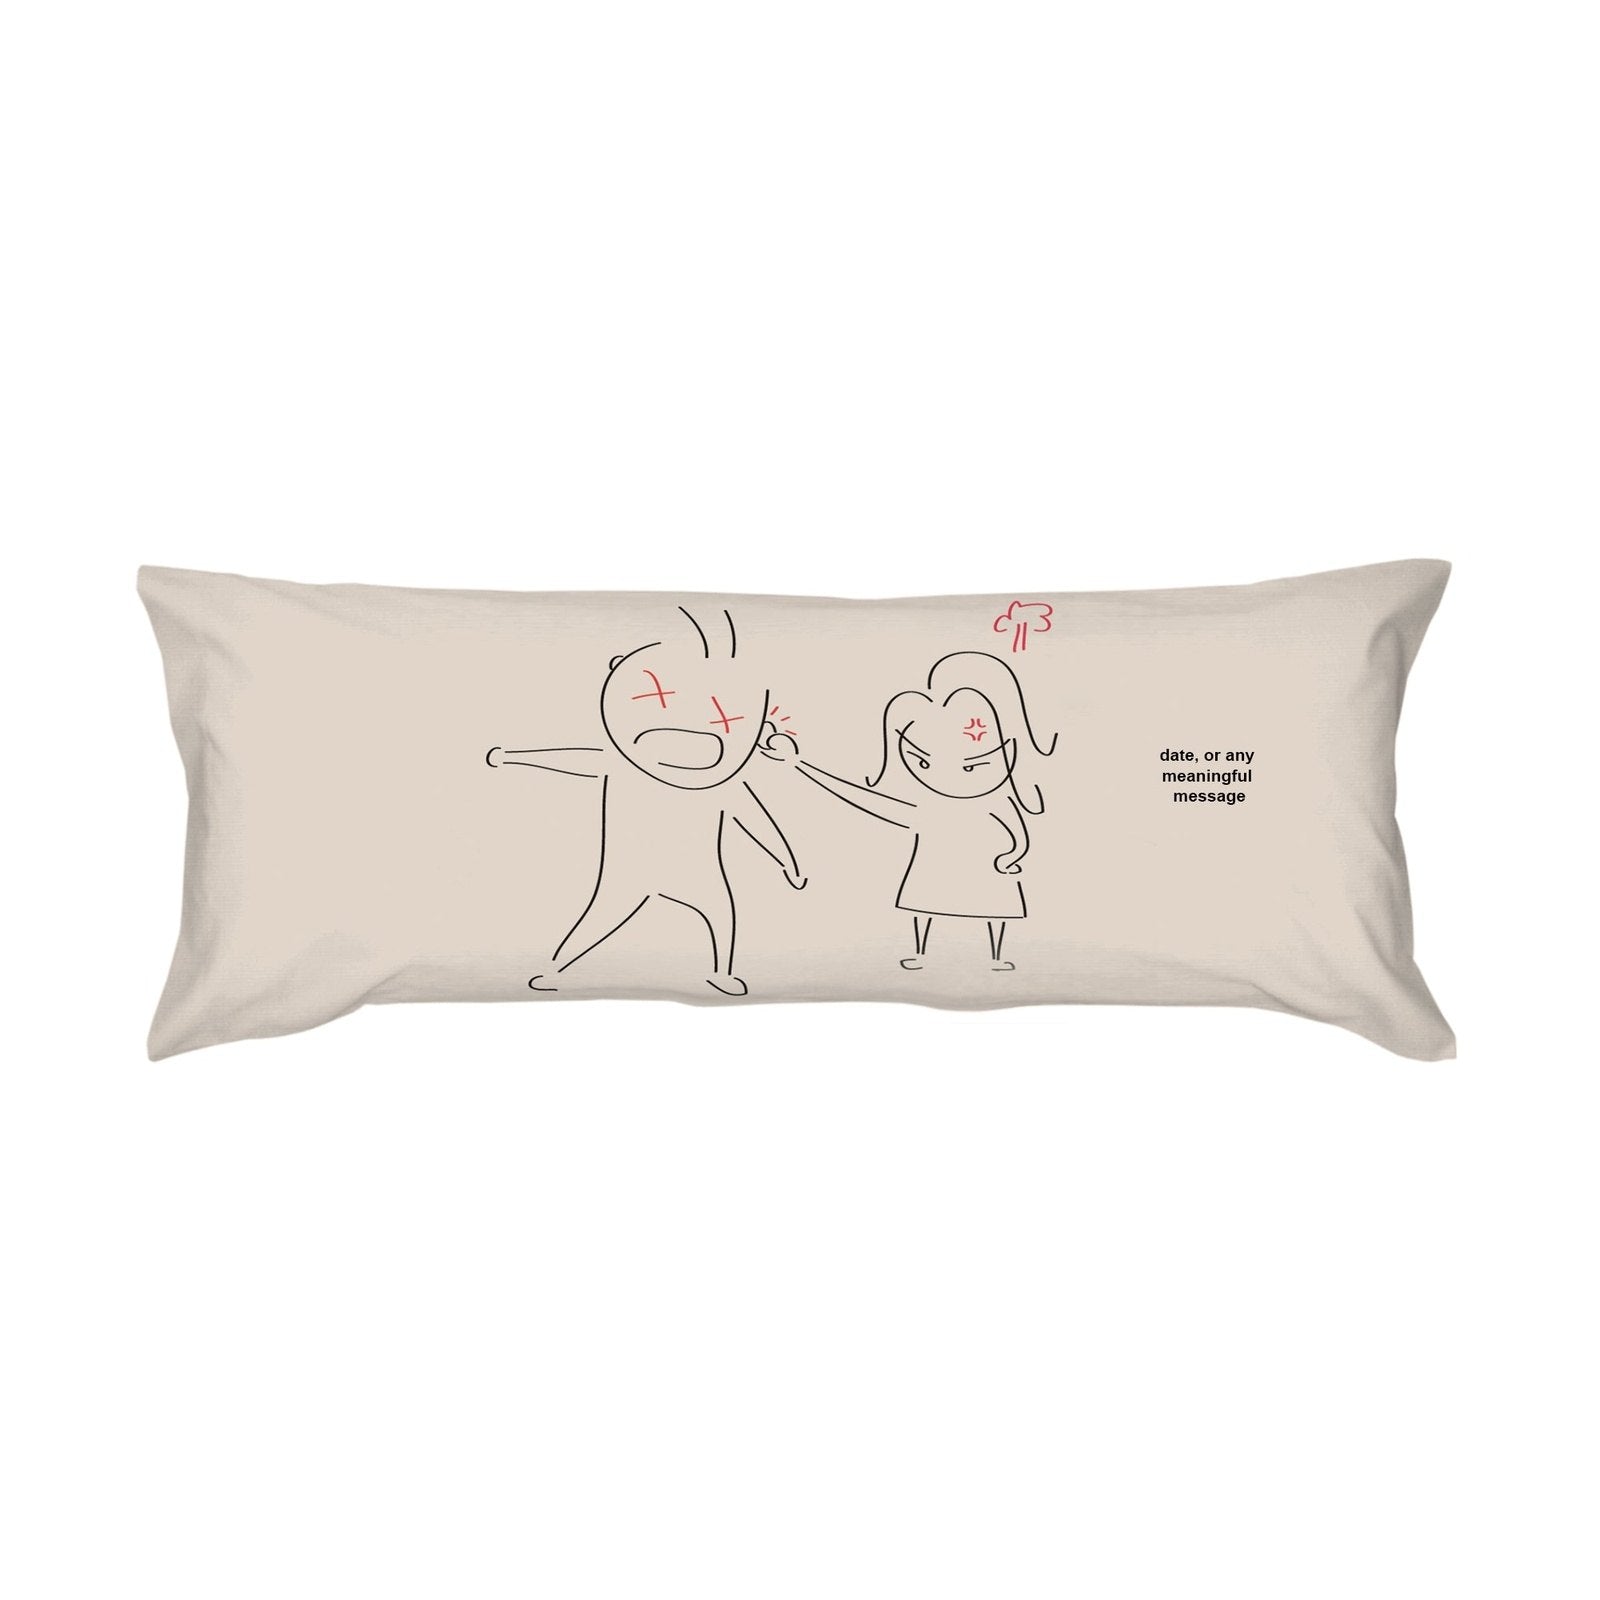 Oops! My bad - Hug pillowcaseHome & GardenHuman Touch Official
"I beg and accept all the blame on no condition. Do what you think you should as you wish" Let this Human Touch design help you said sorry for your darling. No need